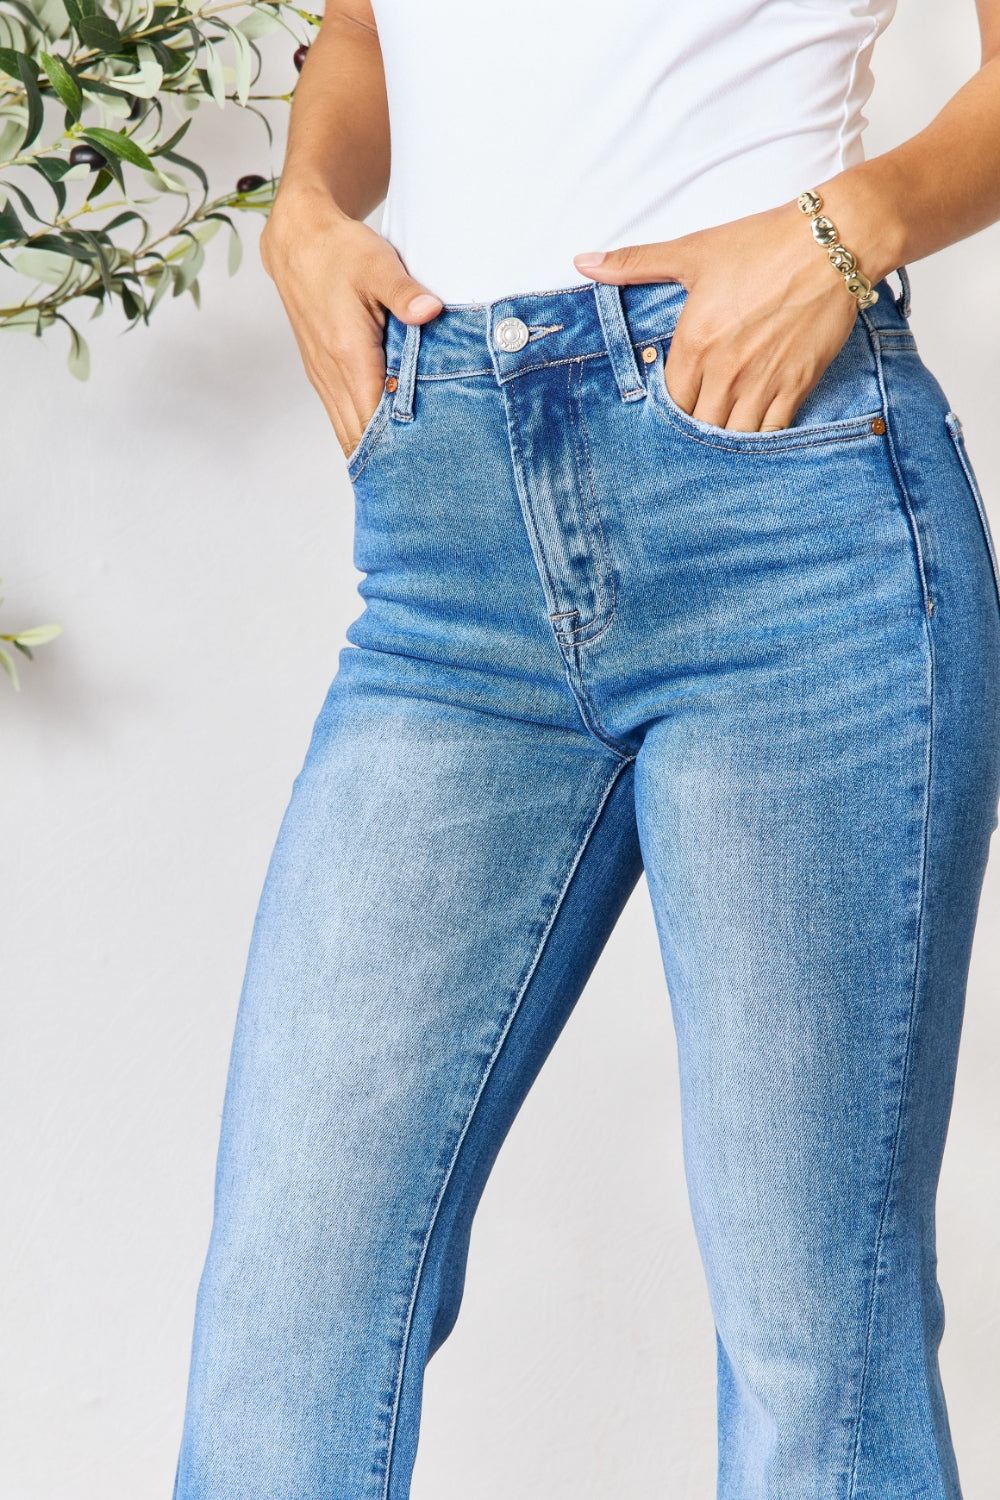 BAYEAS - Slit Flare Jeans - Inspired Eye Boutique